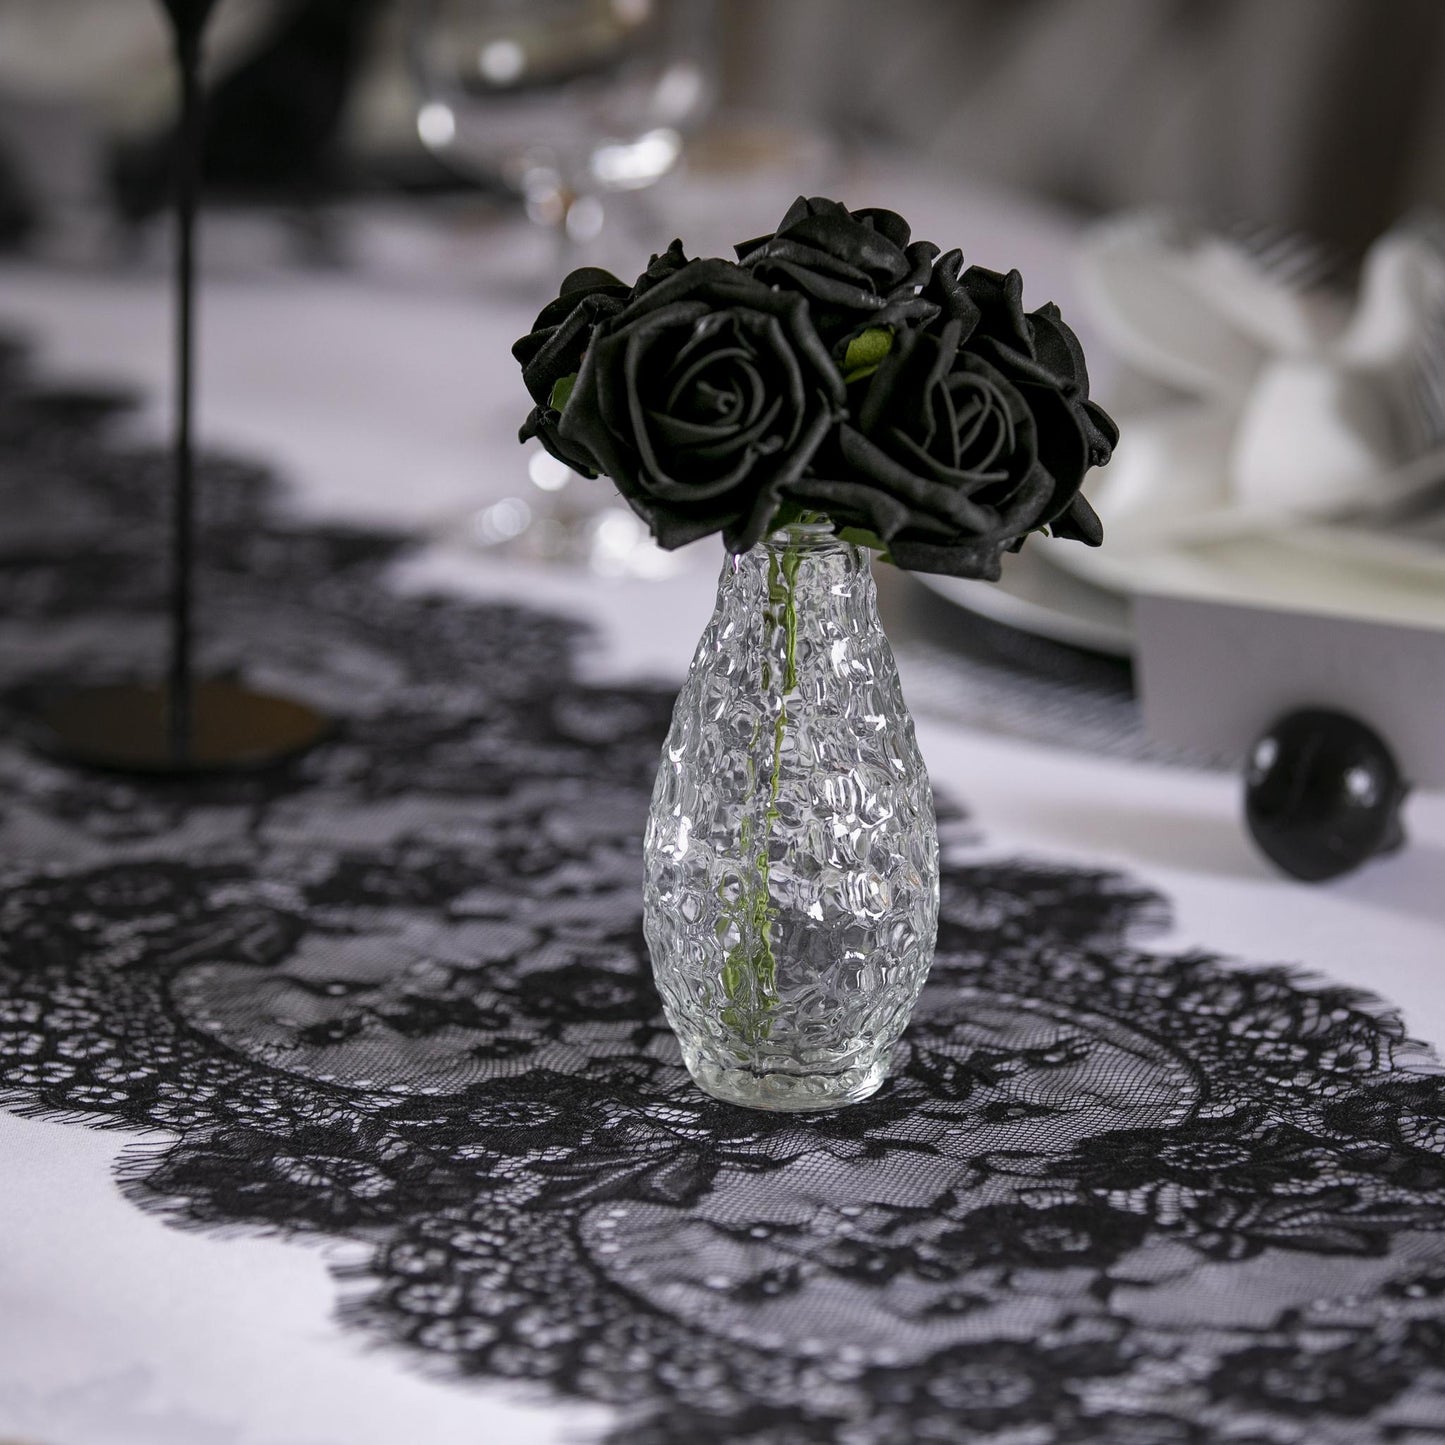 Black Lace Table Runner - Tableday